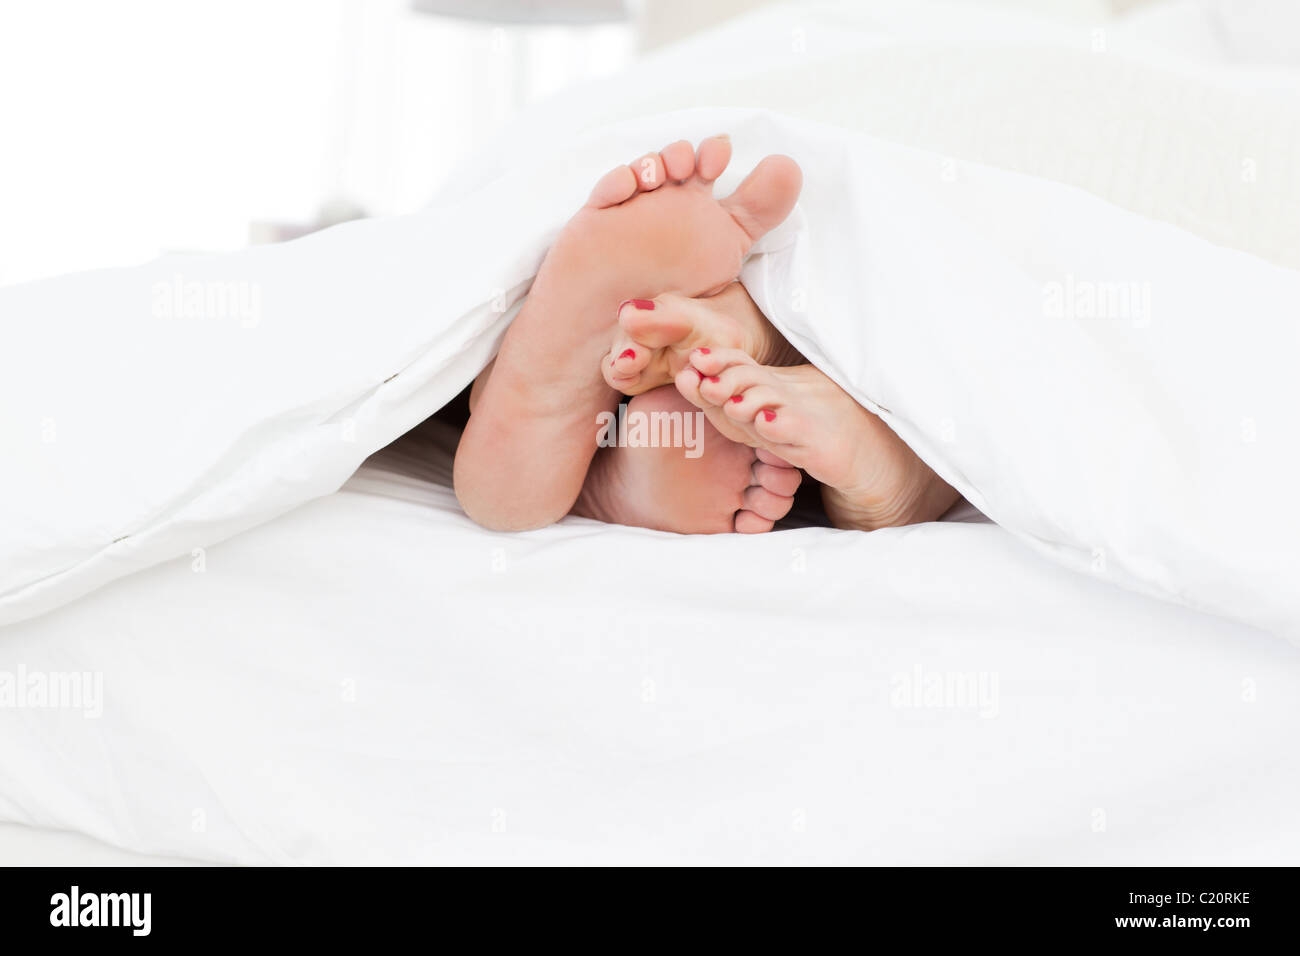 Couple showing their feet while lying on a bed Stock Photo